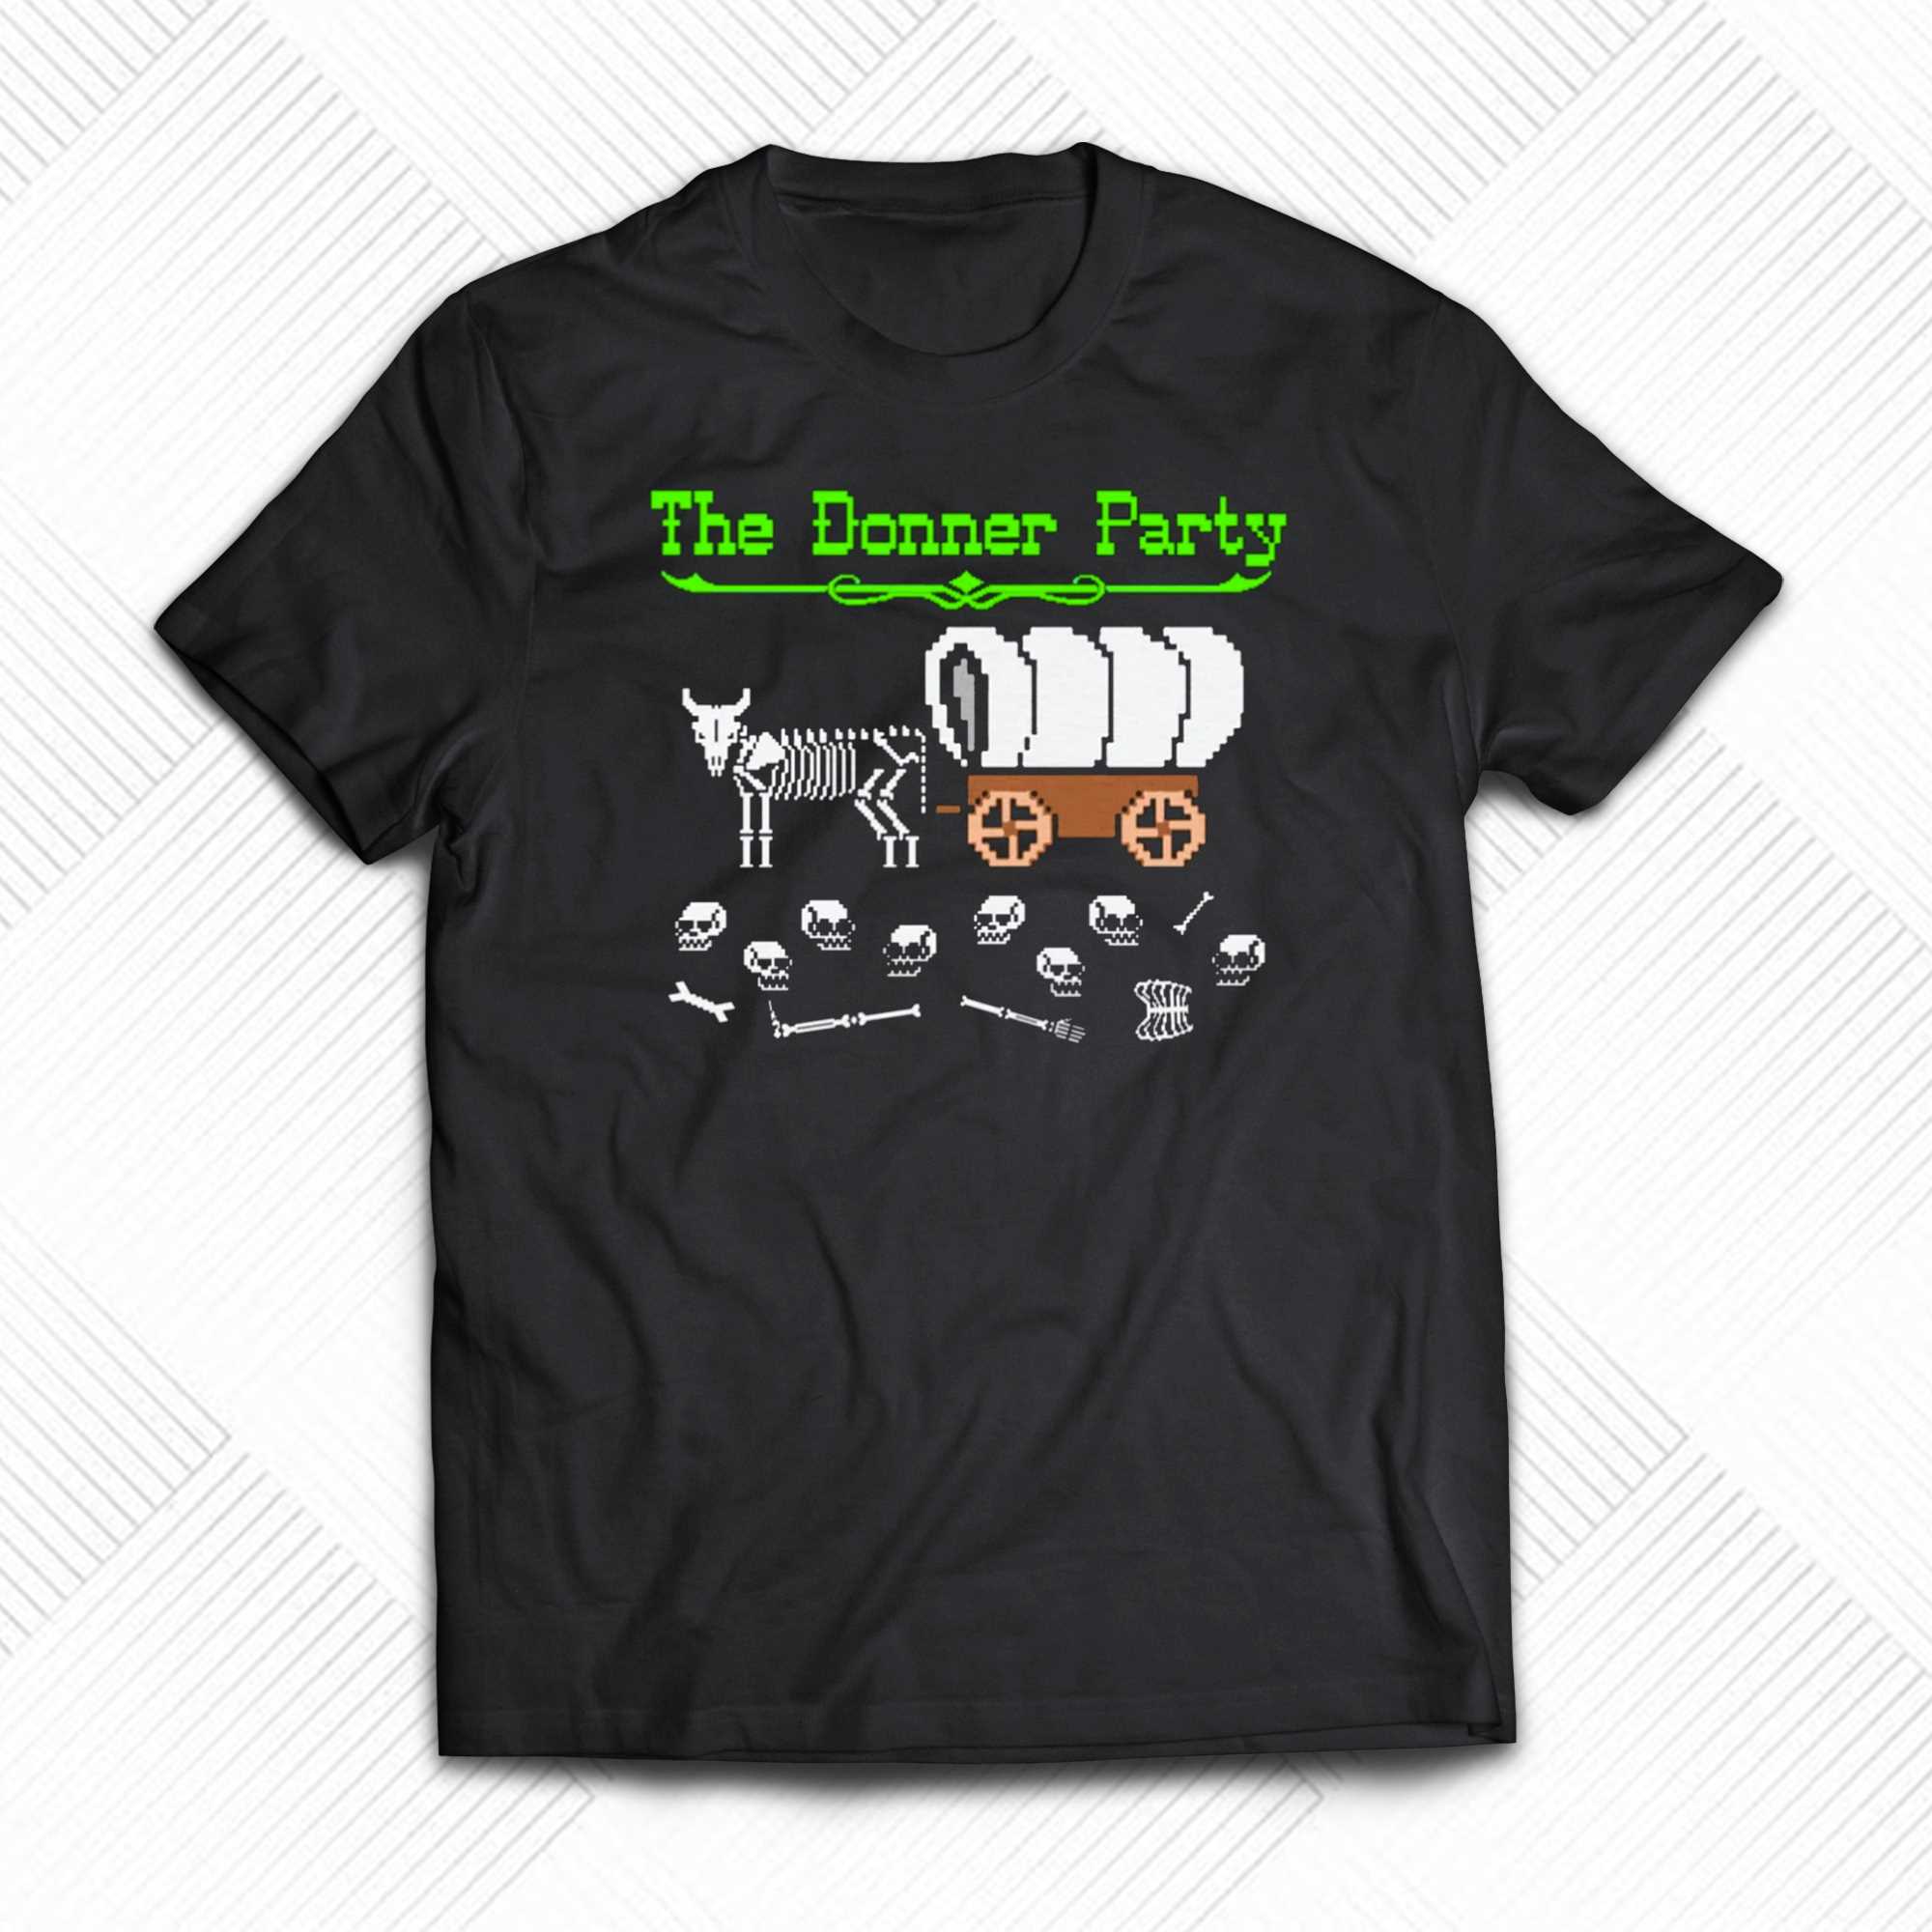 the donner party shirt that go hard t shirt 1 1